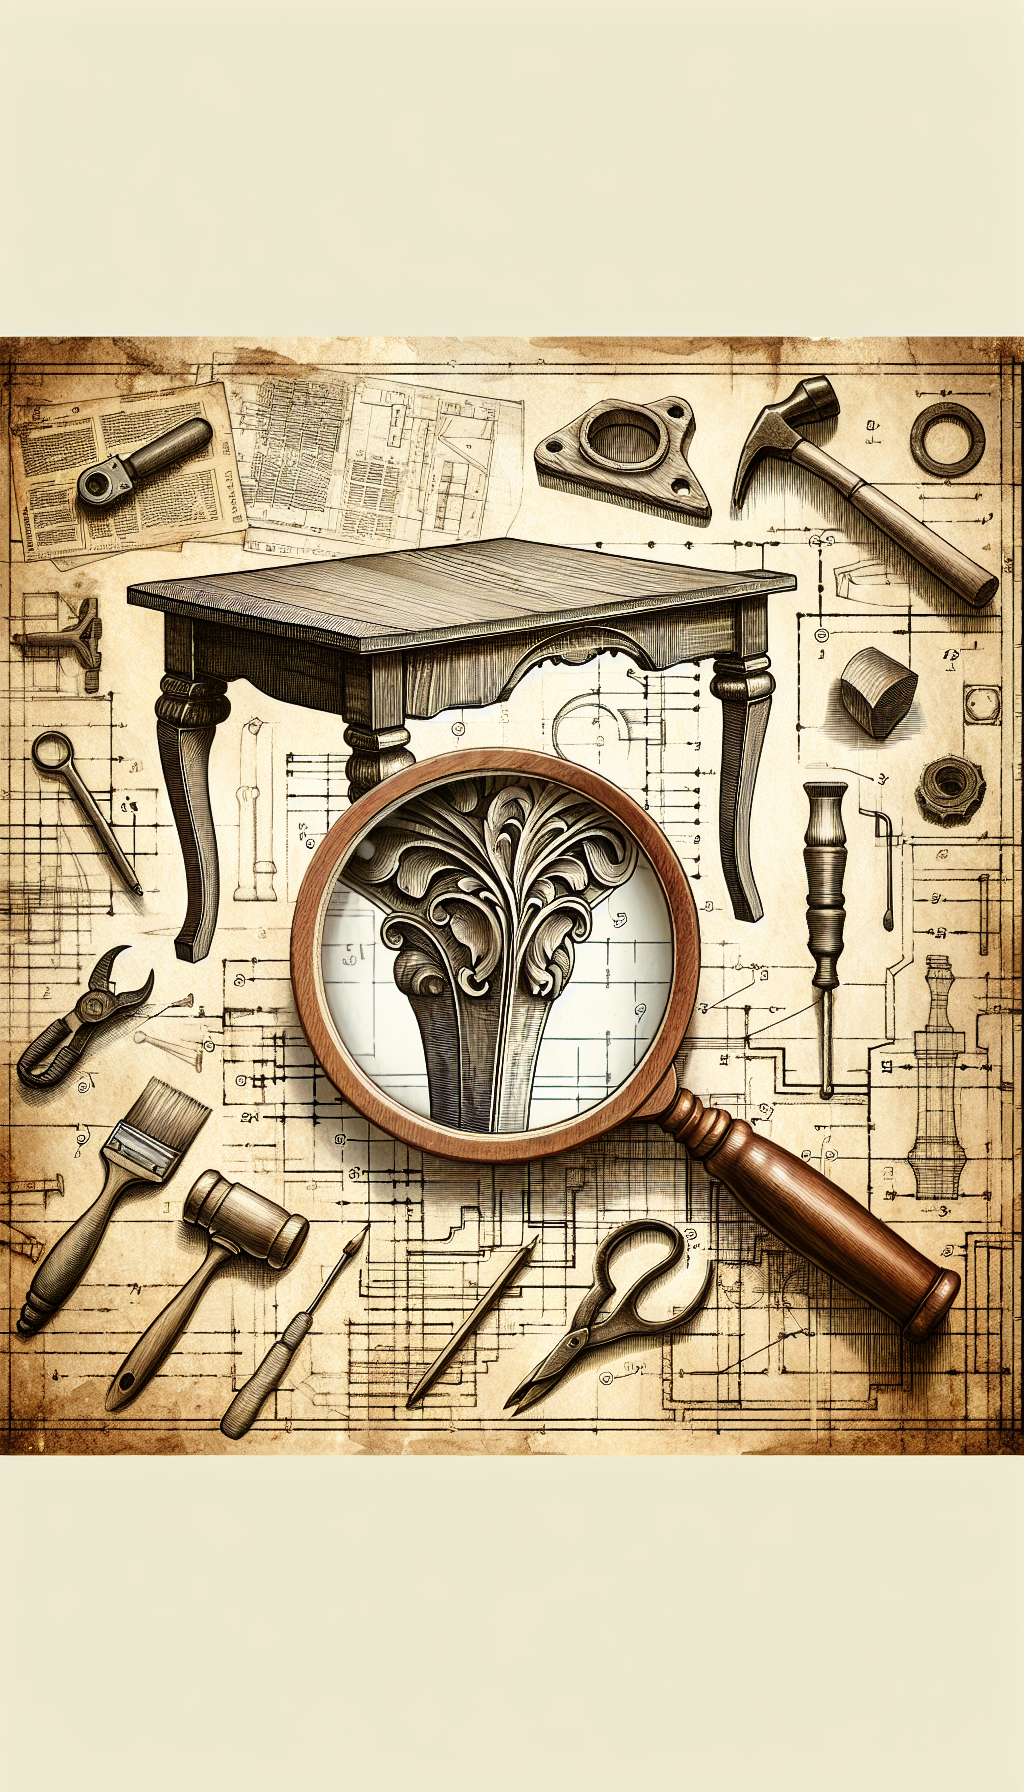 An illustration depicts a magnifying glass hovering over the intricately carved leg of an antique drop leaf table, with faded blueprints and tools in the background. Inside the magnifying lens, detailed grain patterns, dovetail joints, and patina swatches representing age clues contrast sharply, as the styles within the lens shift from realistic to impressionistic to denote different craftsmanship eras.